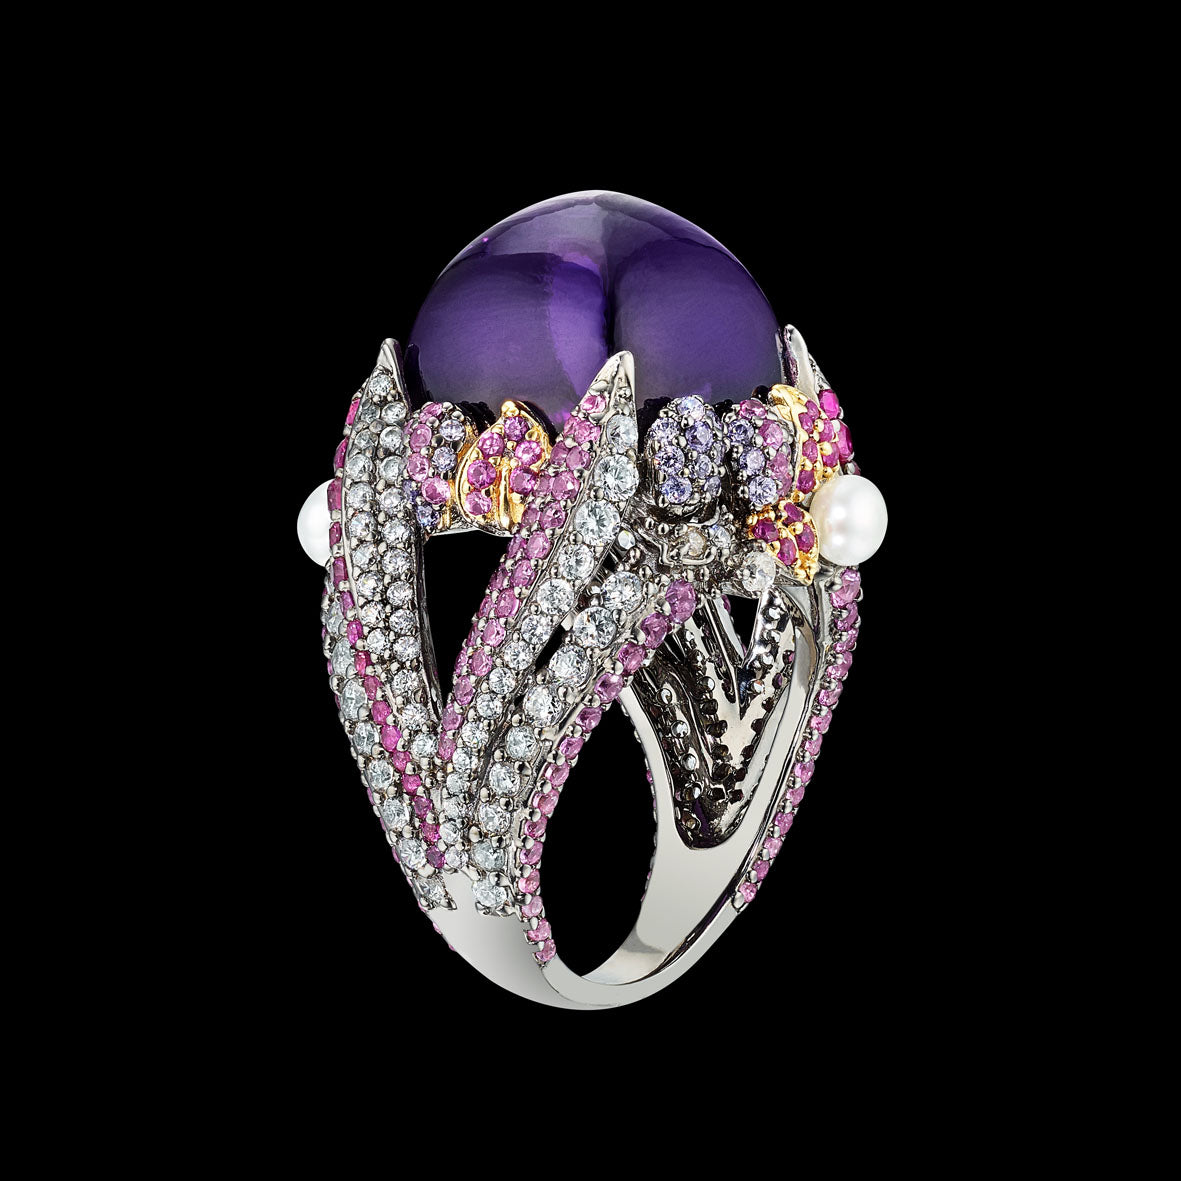 Amethyst Sugarloaf Berry Ring, Ring, Anabela Chan Joaillerie - Fine jewelry with laboratory grown and created gemstones hand-crafted in the United Kingdom. Anabela Chan Joaillerie is the first fine jewellery brand in the world to champion laboratory-grown and created gemstones with high jewellery design, artisanal craftsmanship and a focus on ethical and sustainable innovations.